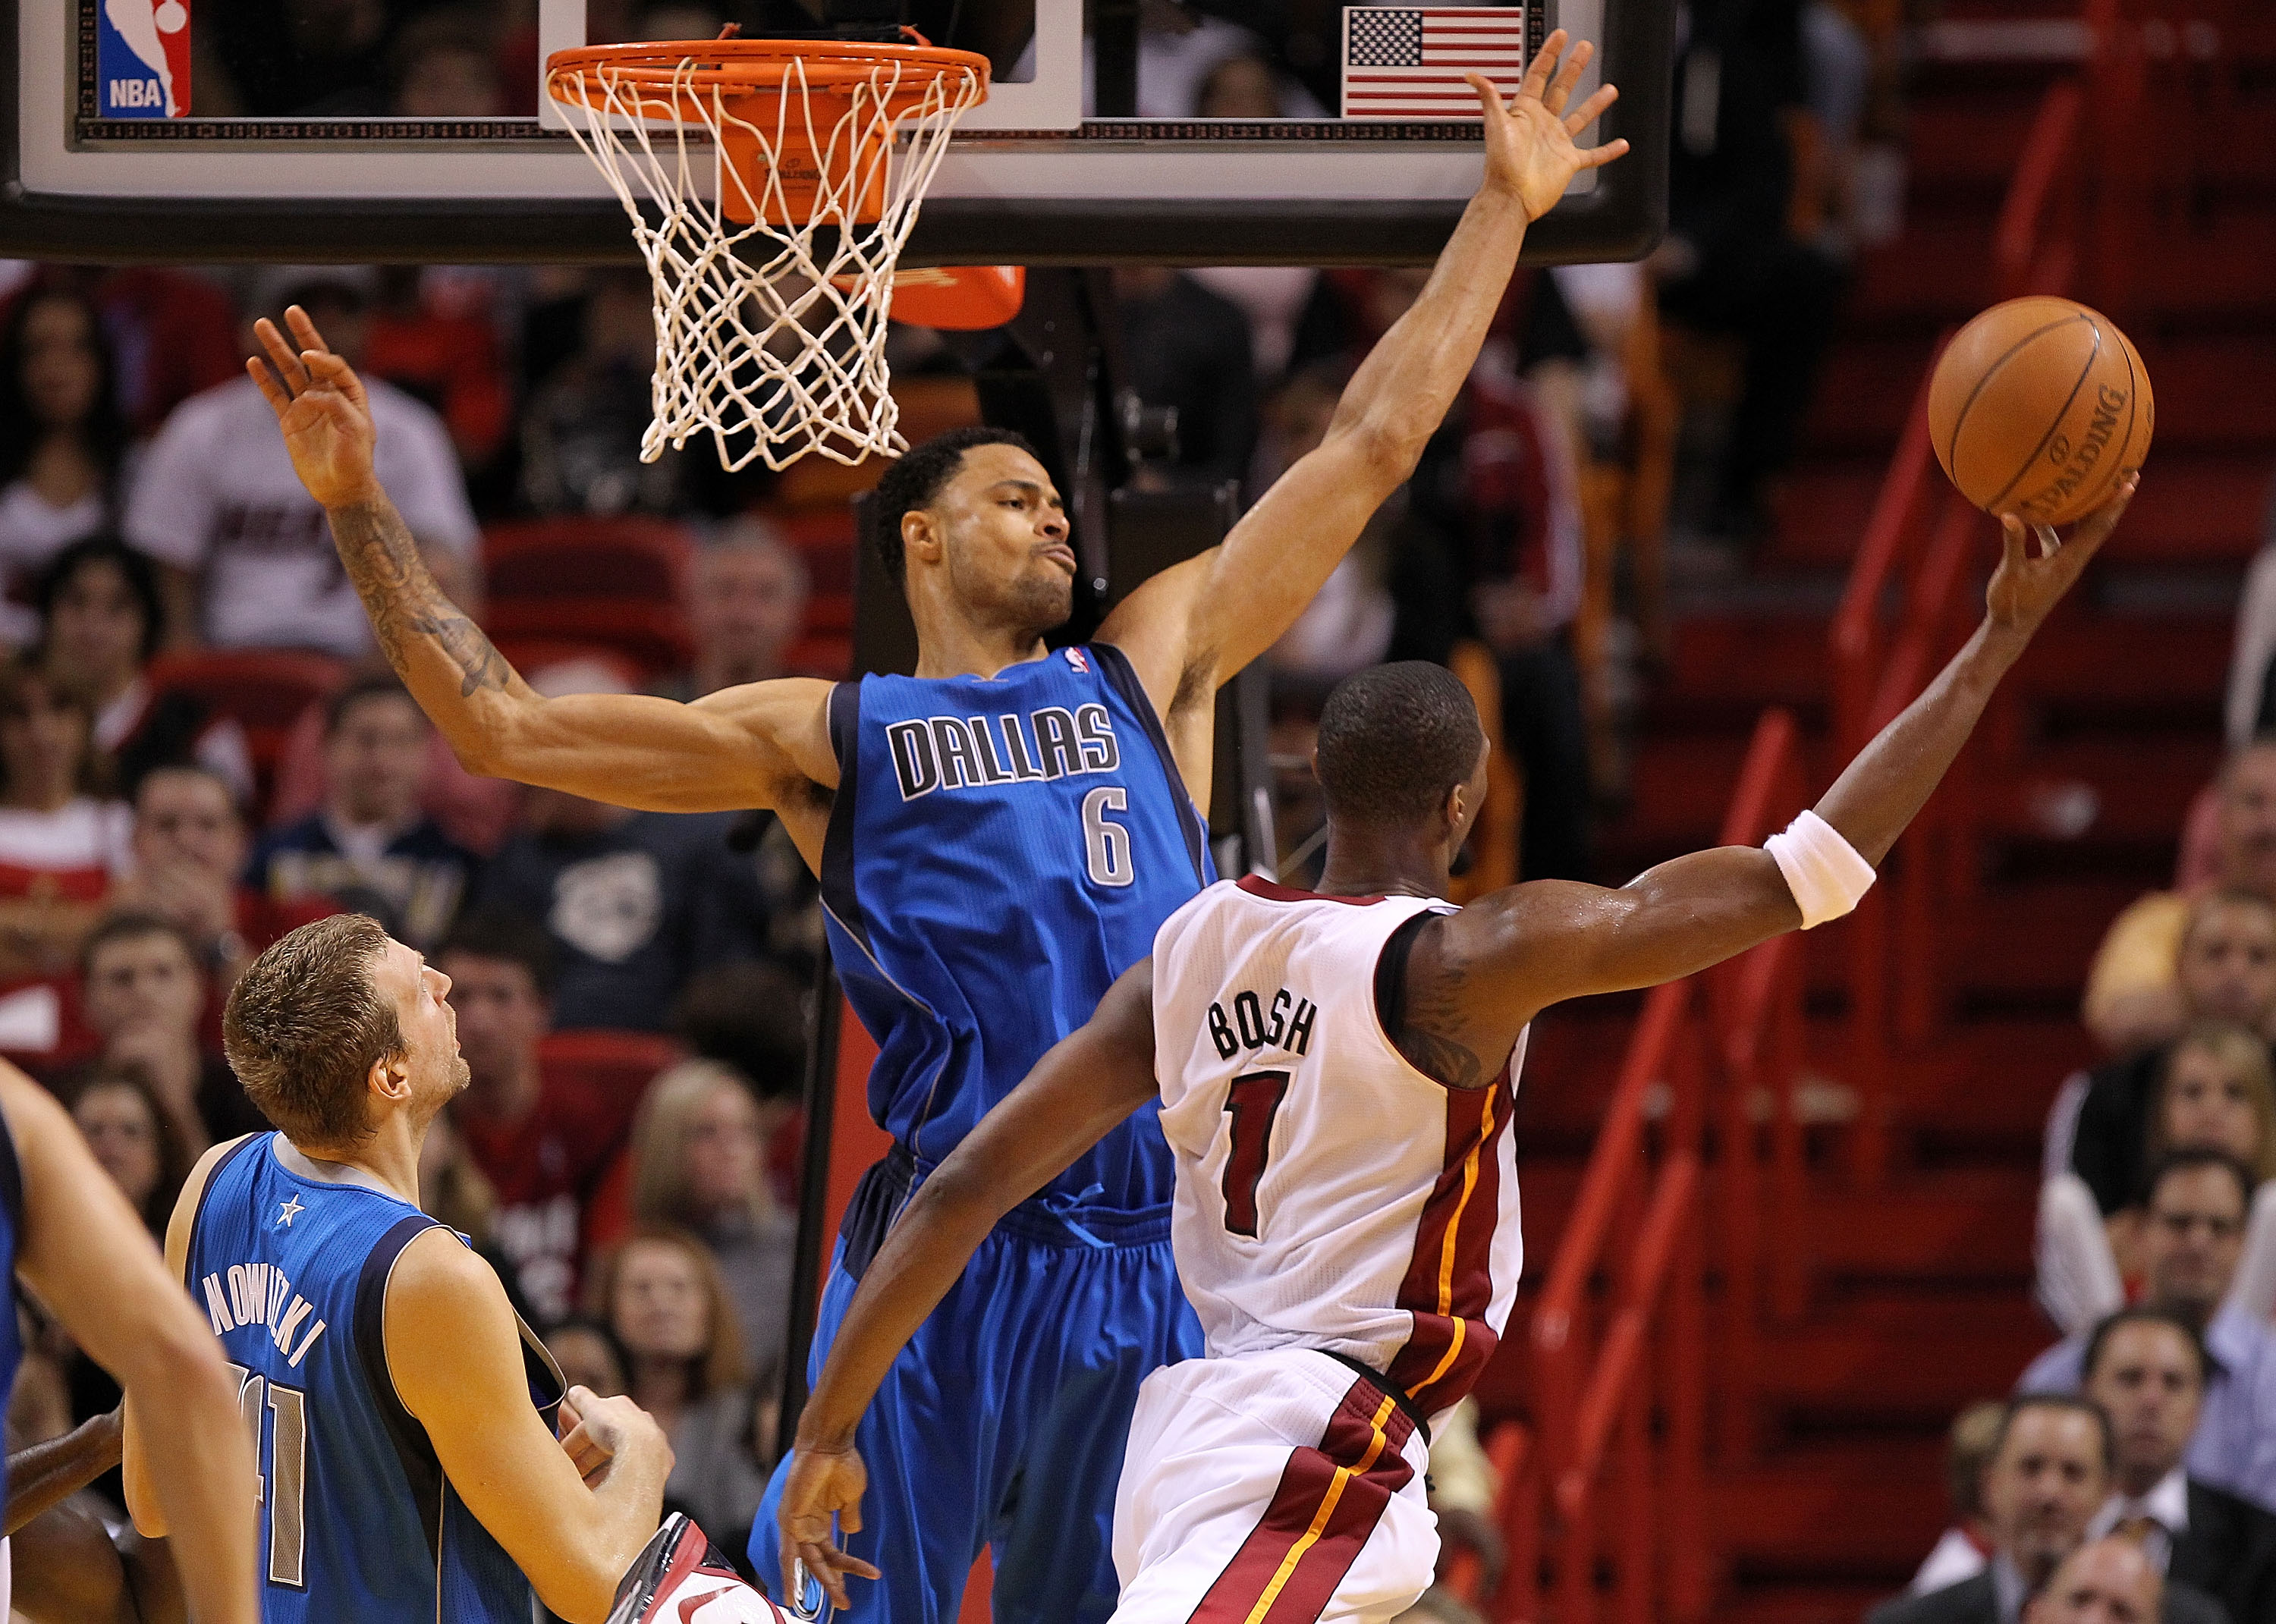 MIAMI, FL - DECEMBER 20:  Chris Bosh #1 of the Miami Heat shoots over Tyson Chandler #6 of the Dallas Mavericks during a game at American Airlines Arena on December 20, 2010 in Miami, Florida. NOTE TO USER: User expressly acknowledges and agrees that, by